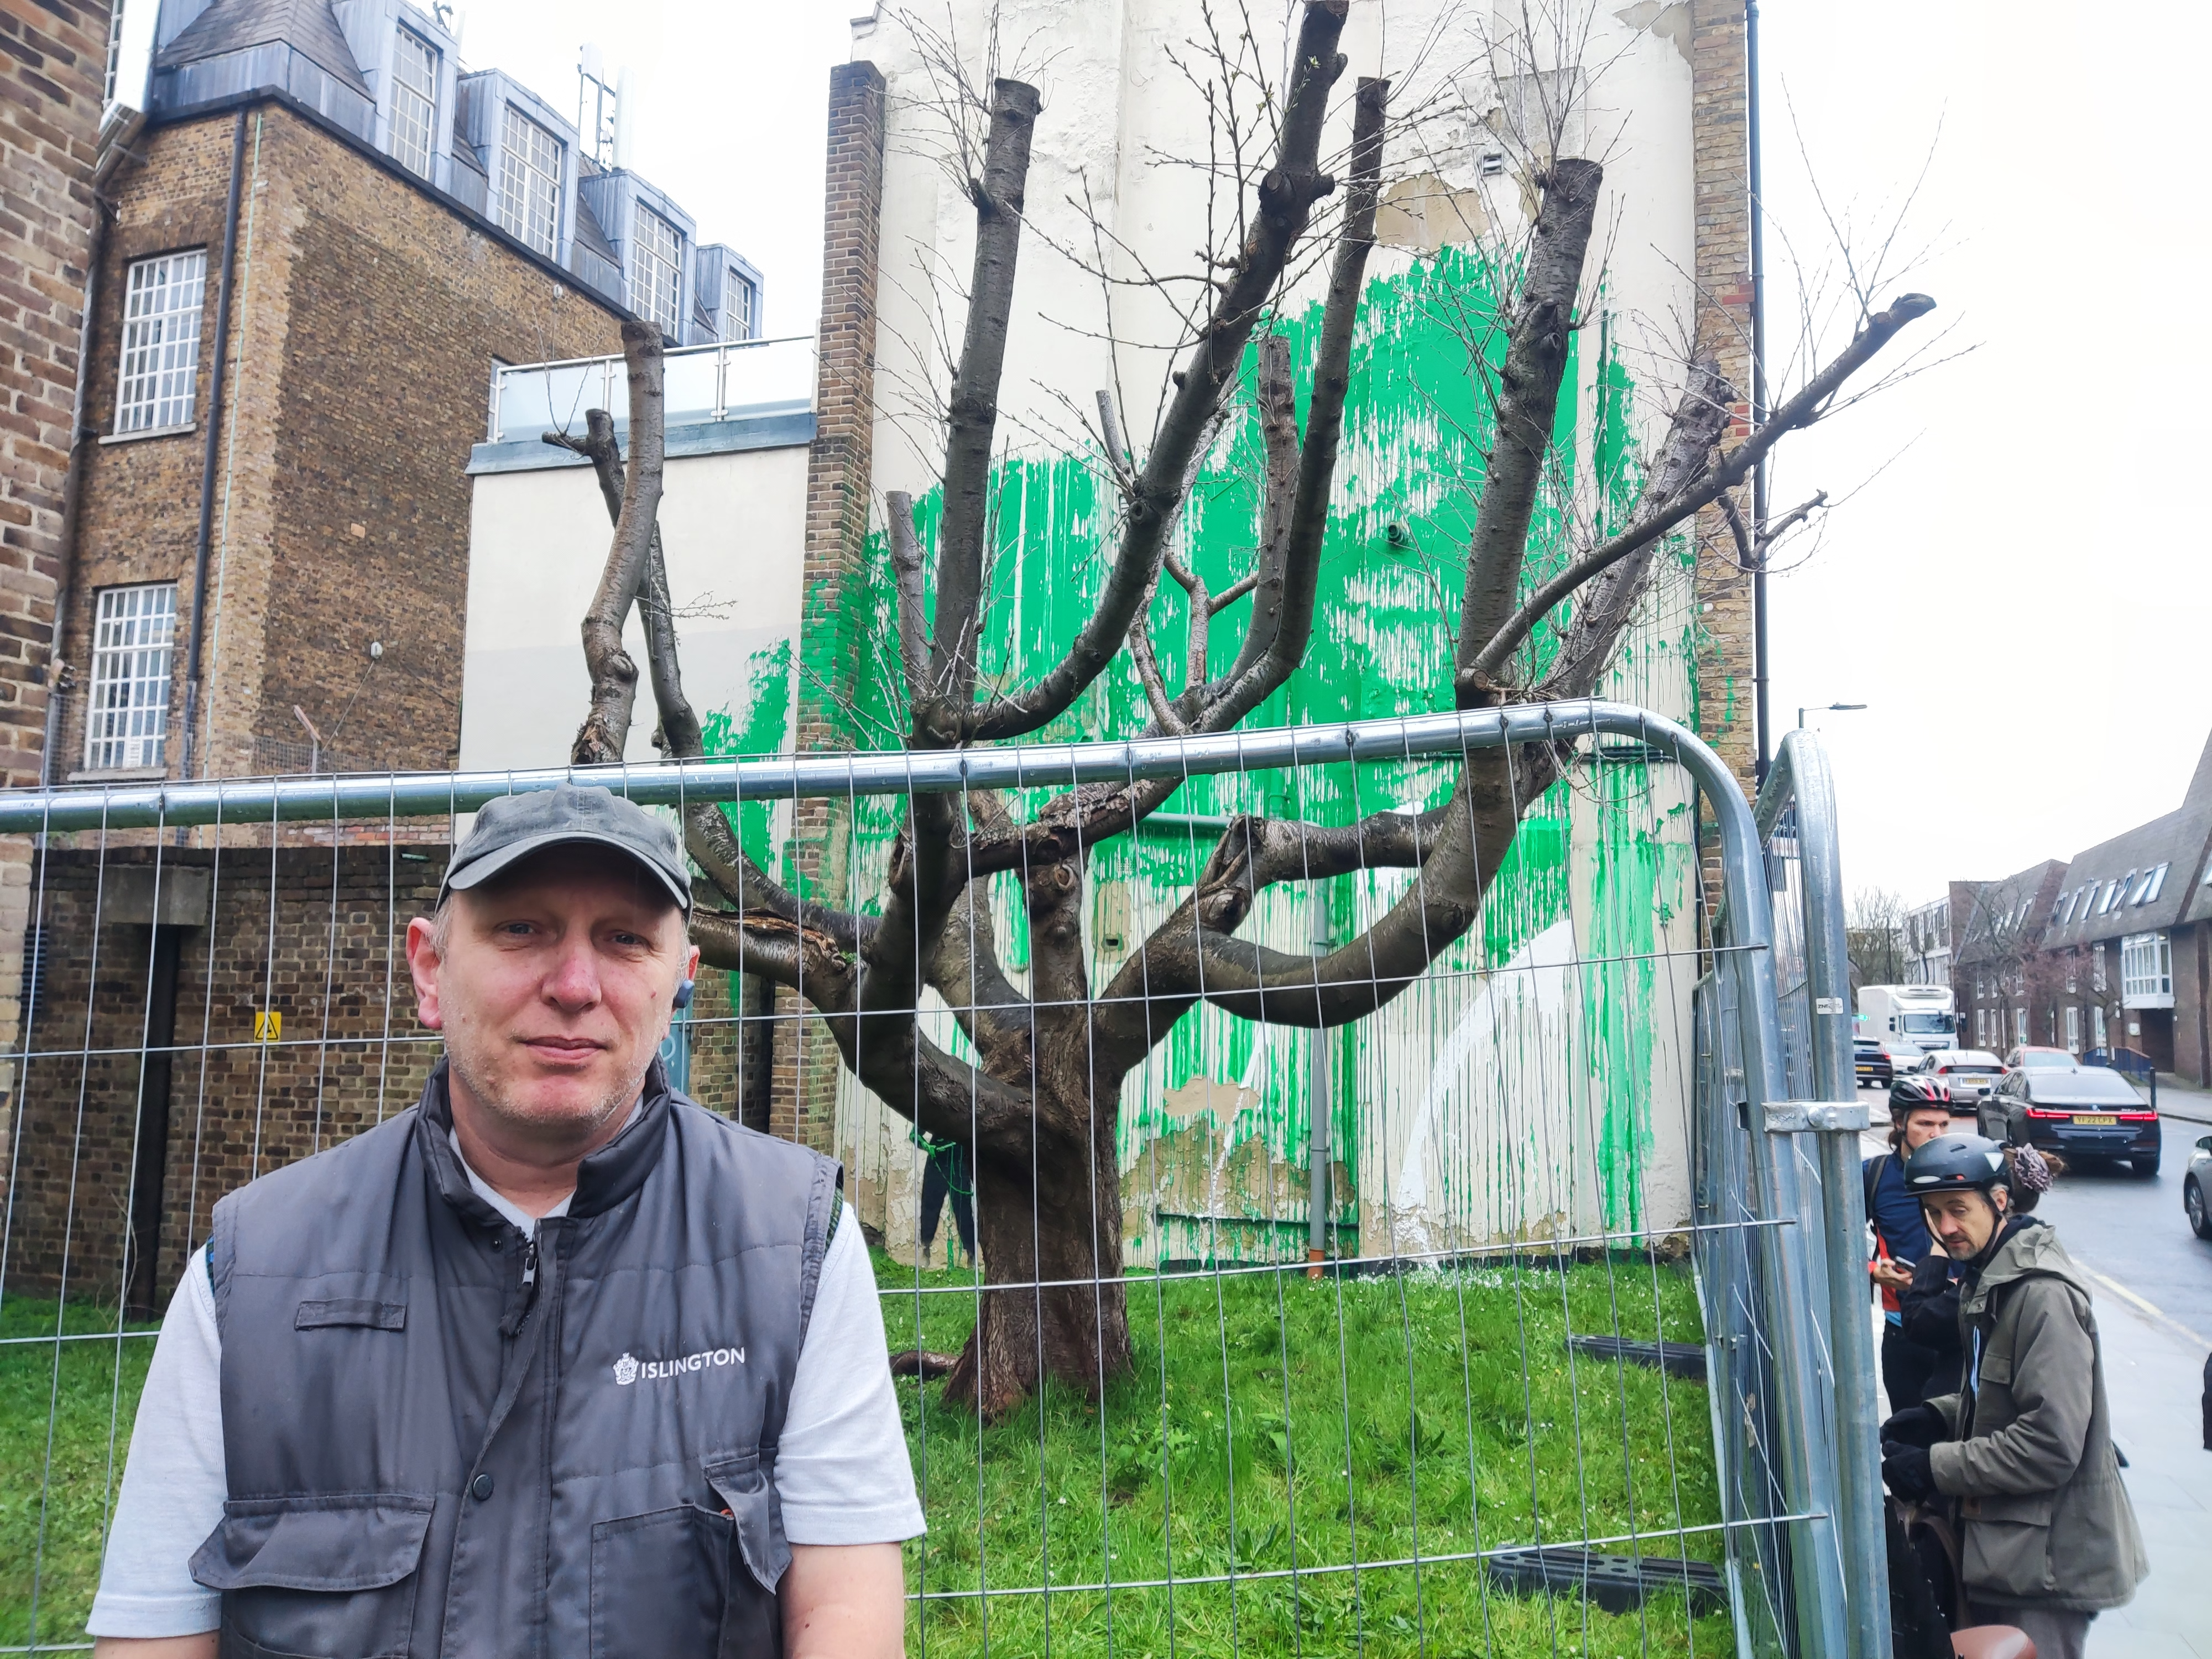 Lewis Cowell, 51, has been caretaker of the flats for ten years